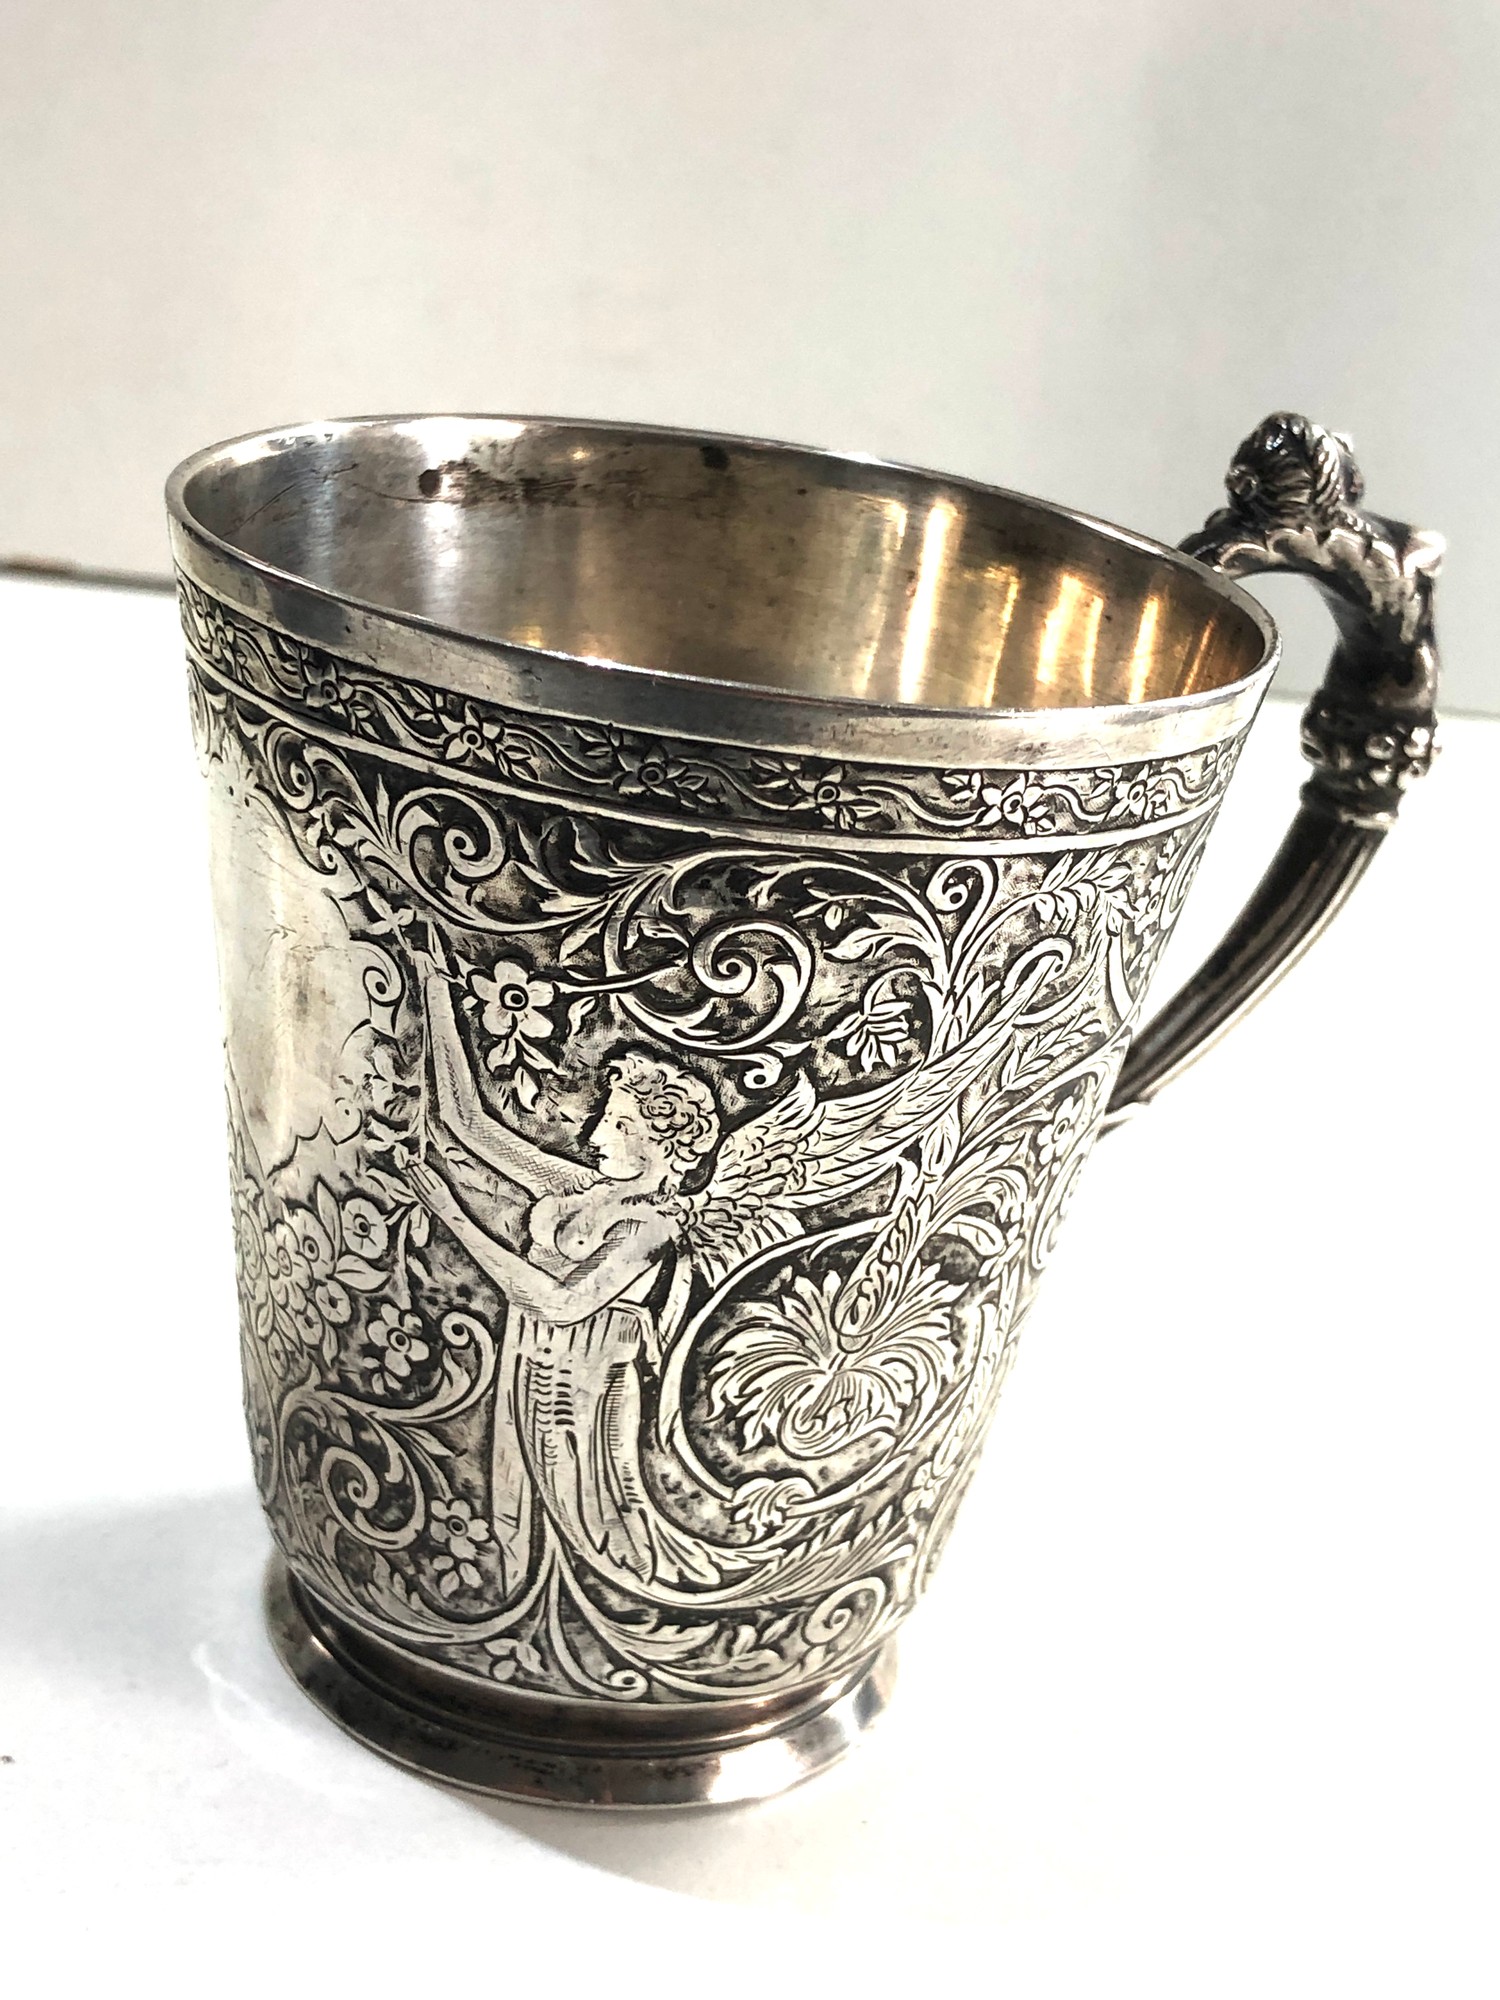 Fine Antique French silver handled cup fine embossed detail of angels and floral pattern design - Image 6 of 11